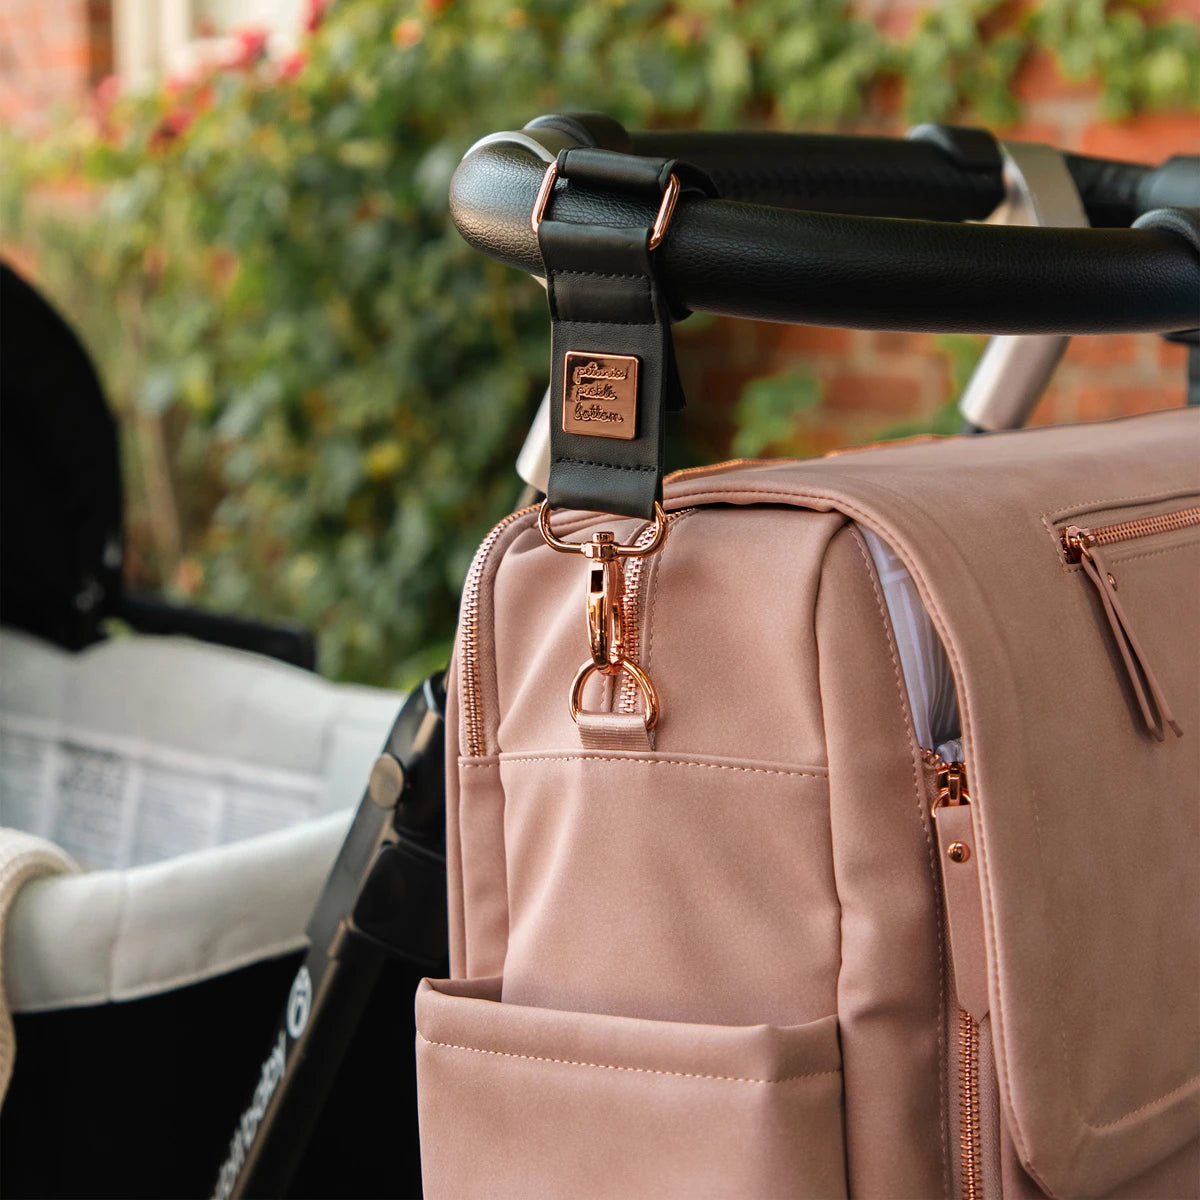 boxy backpack deluxe in toffee rose attached to stroller with valet stroller clips